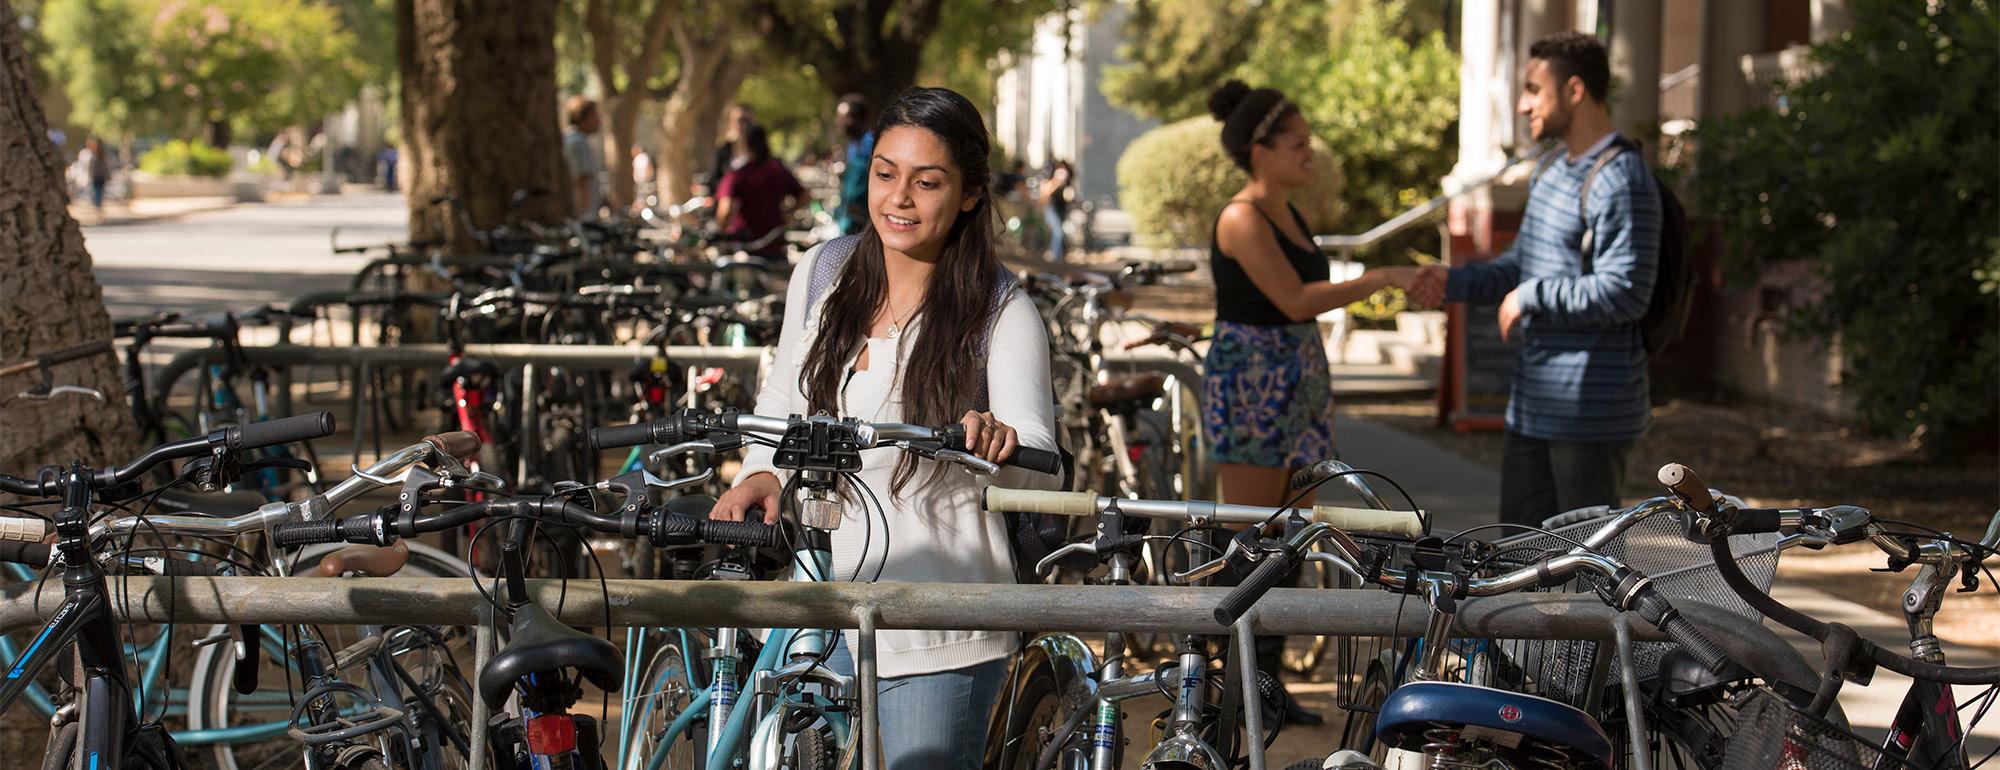 a student unlocking bike in a bike rack full of bikes and two students in the background talking